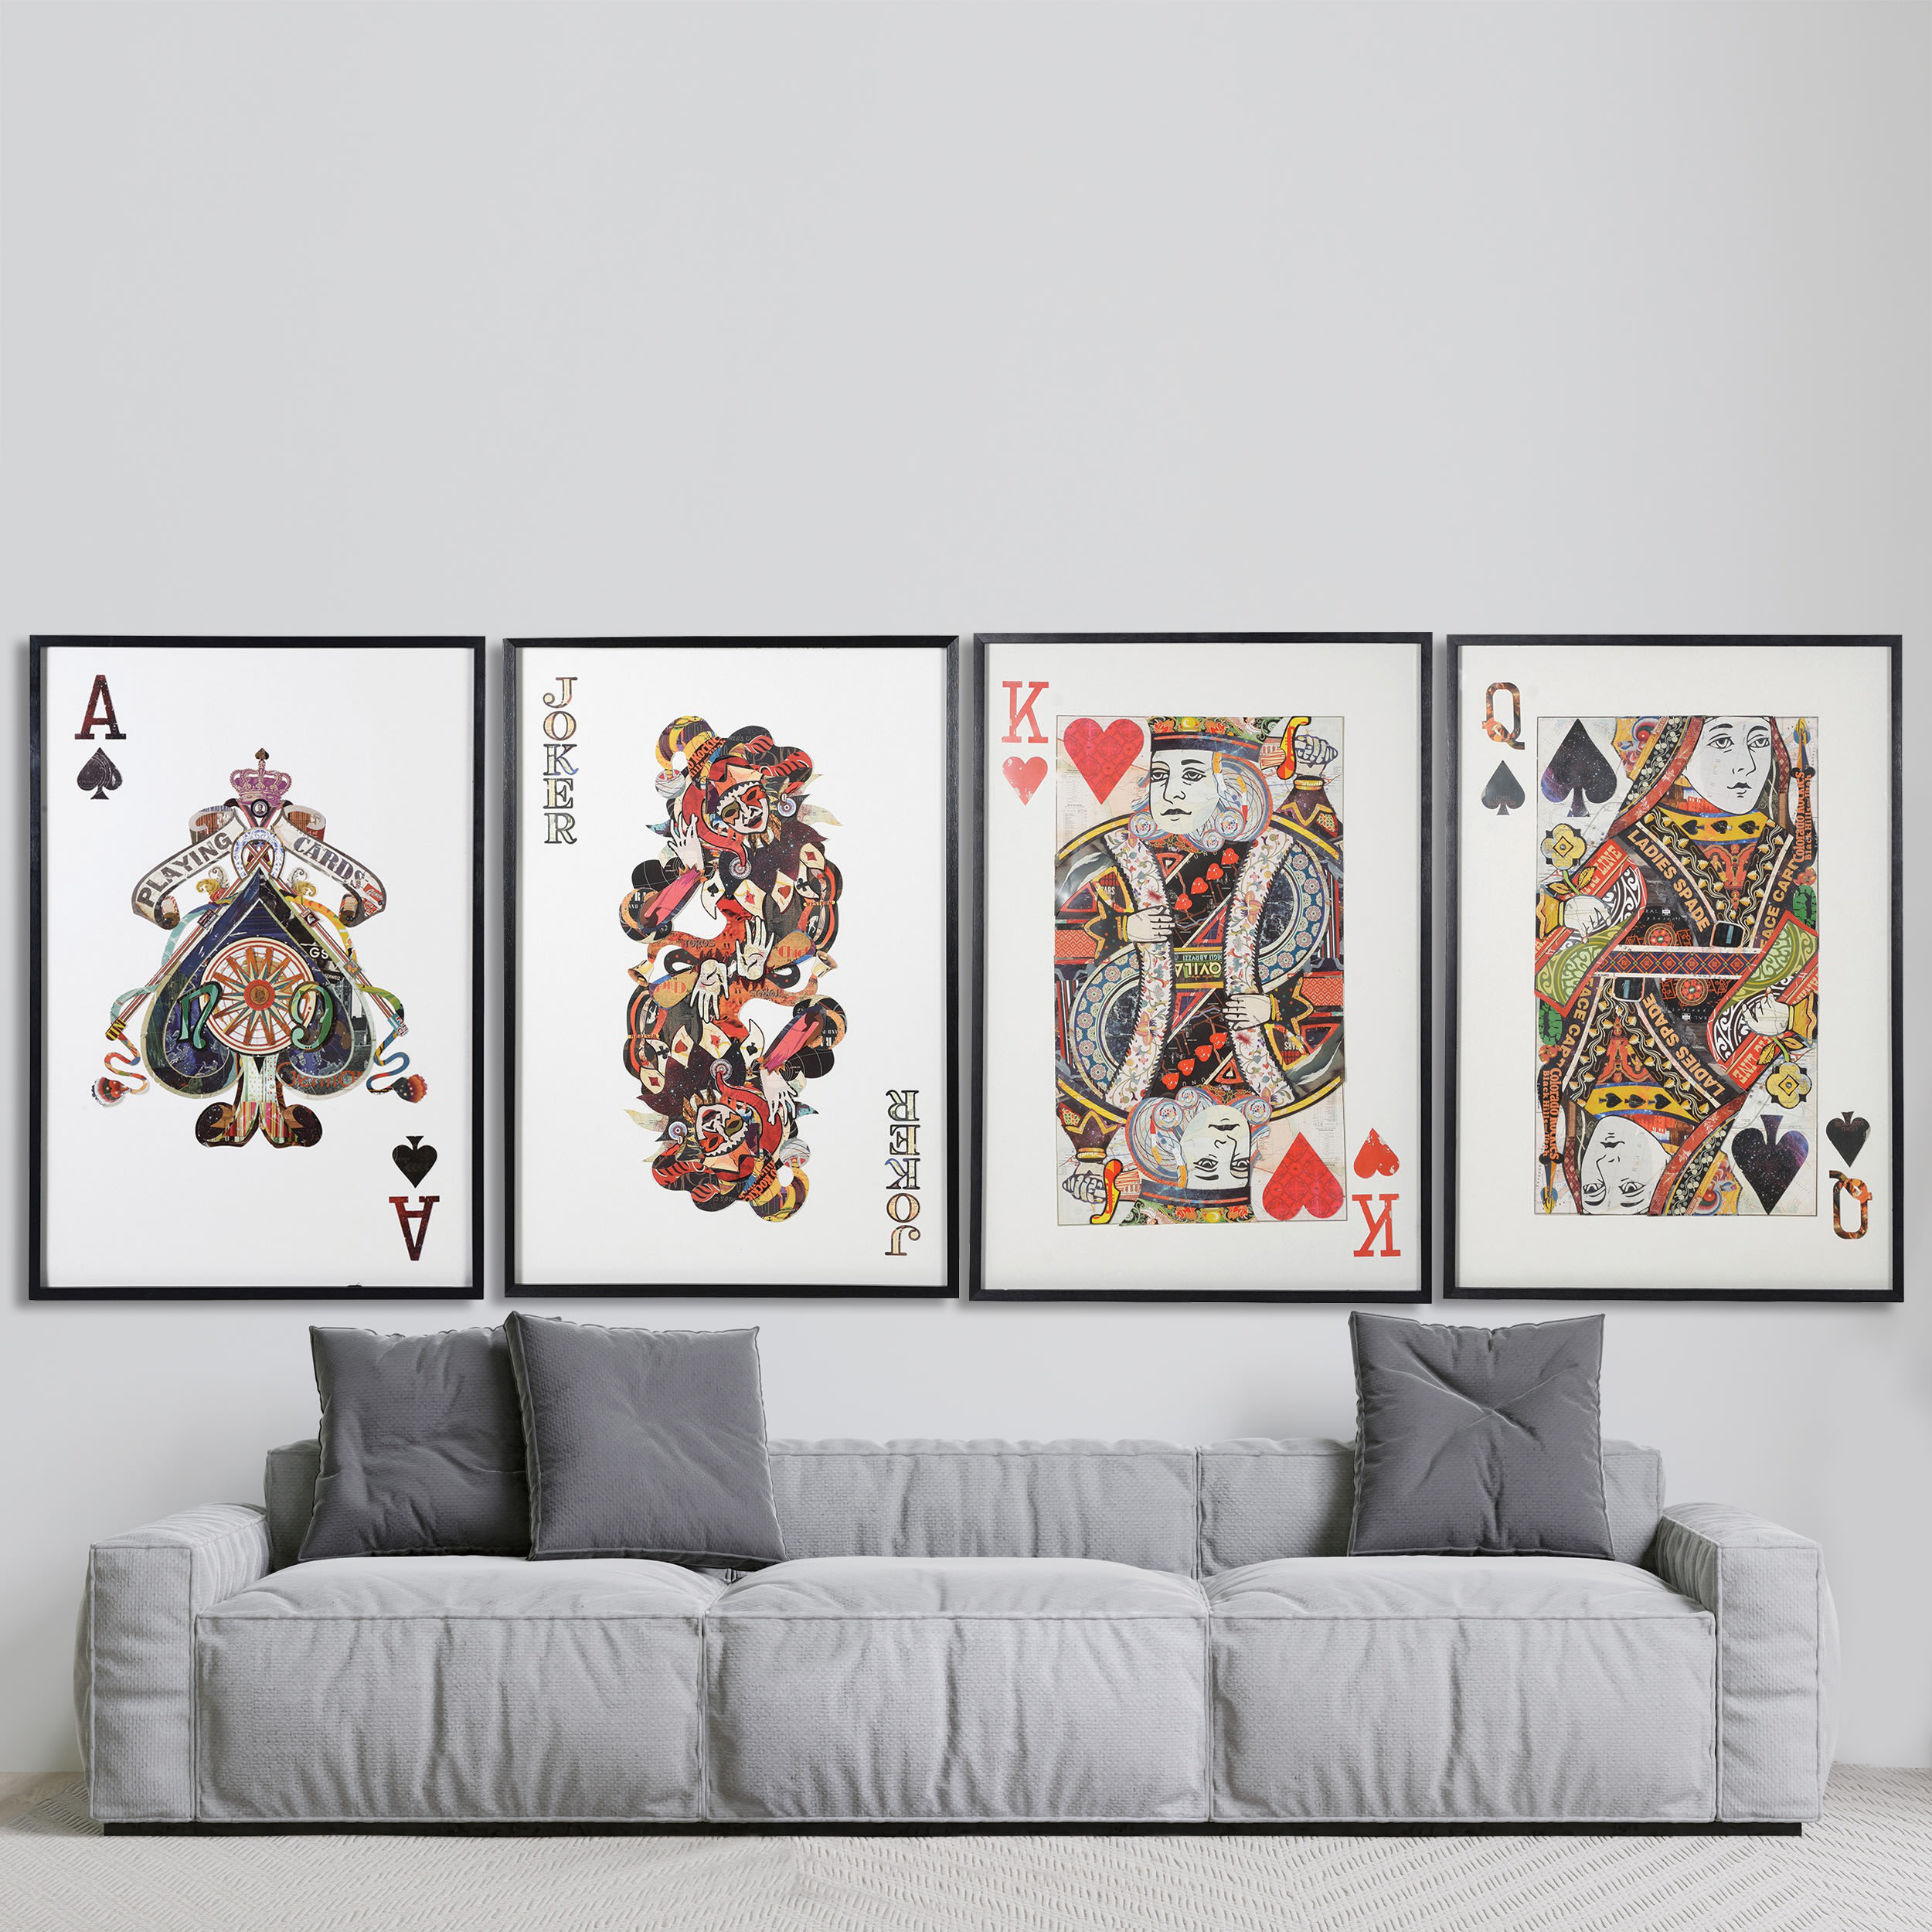 King of Hearts Large Playing Card Art in Frame